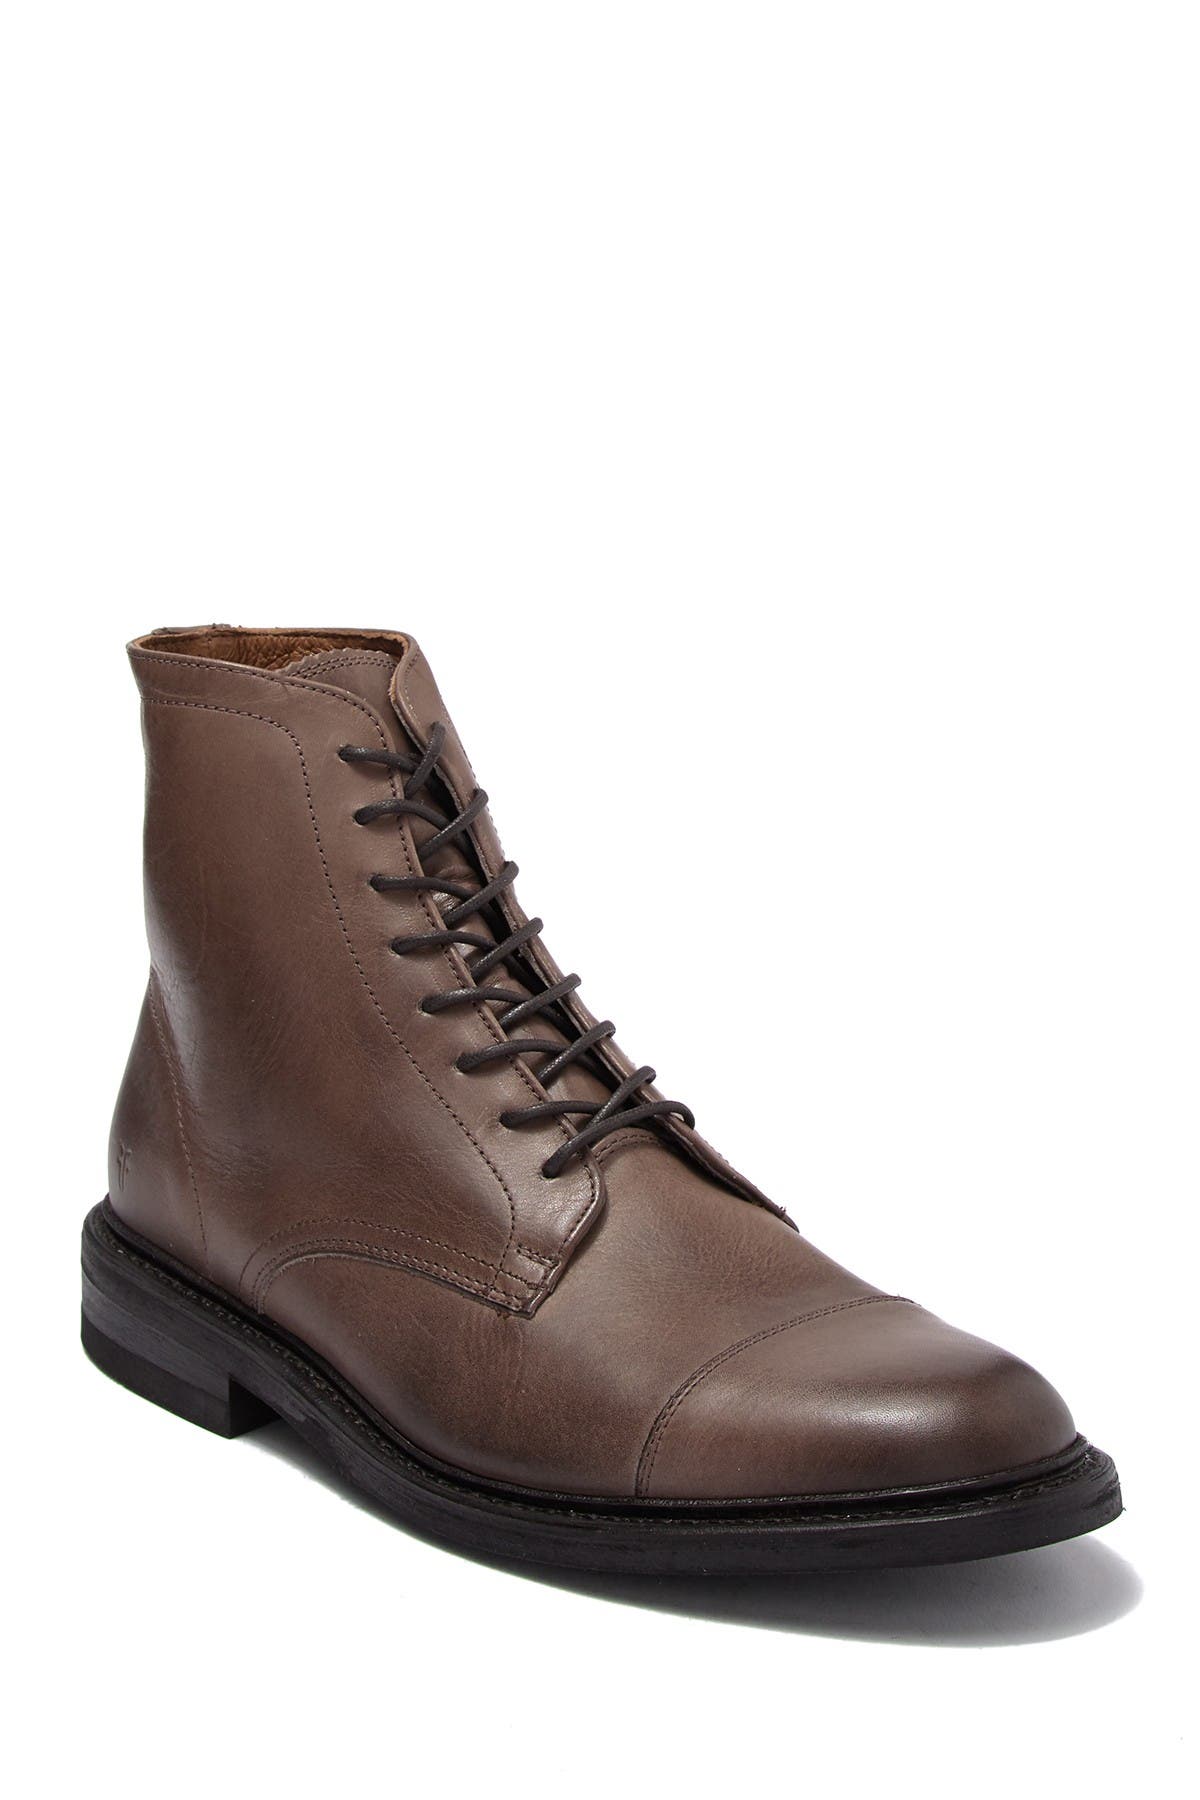 Frye | Seth Leather Lace-Up Boot 